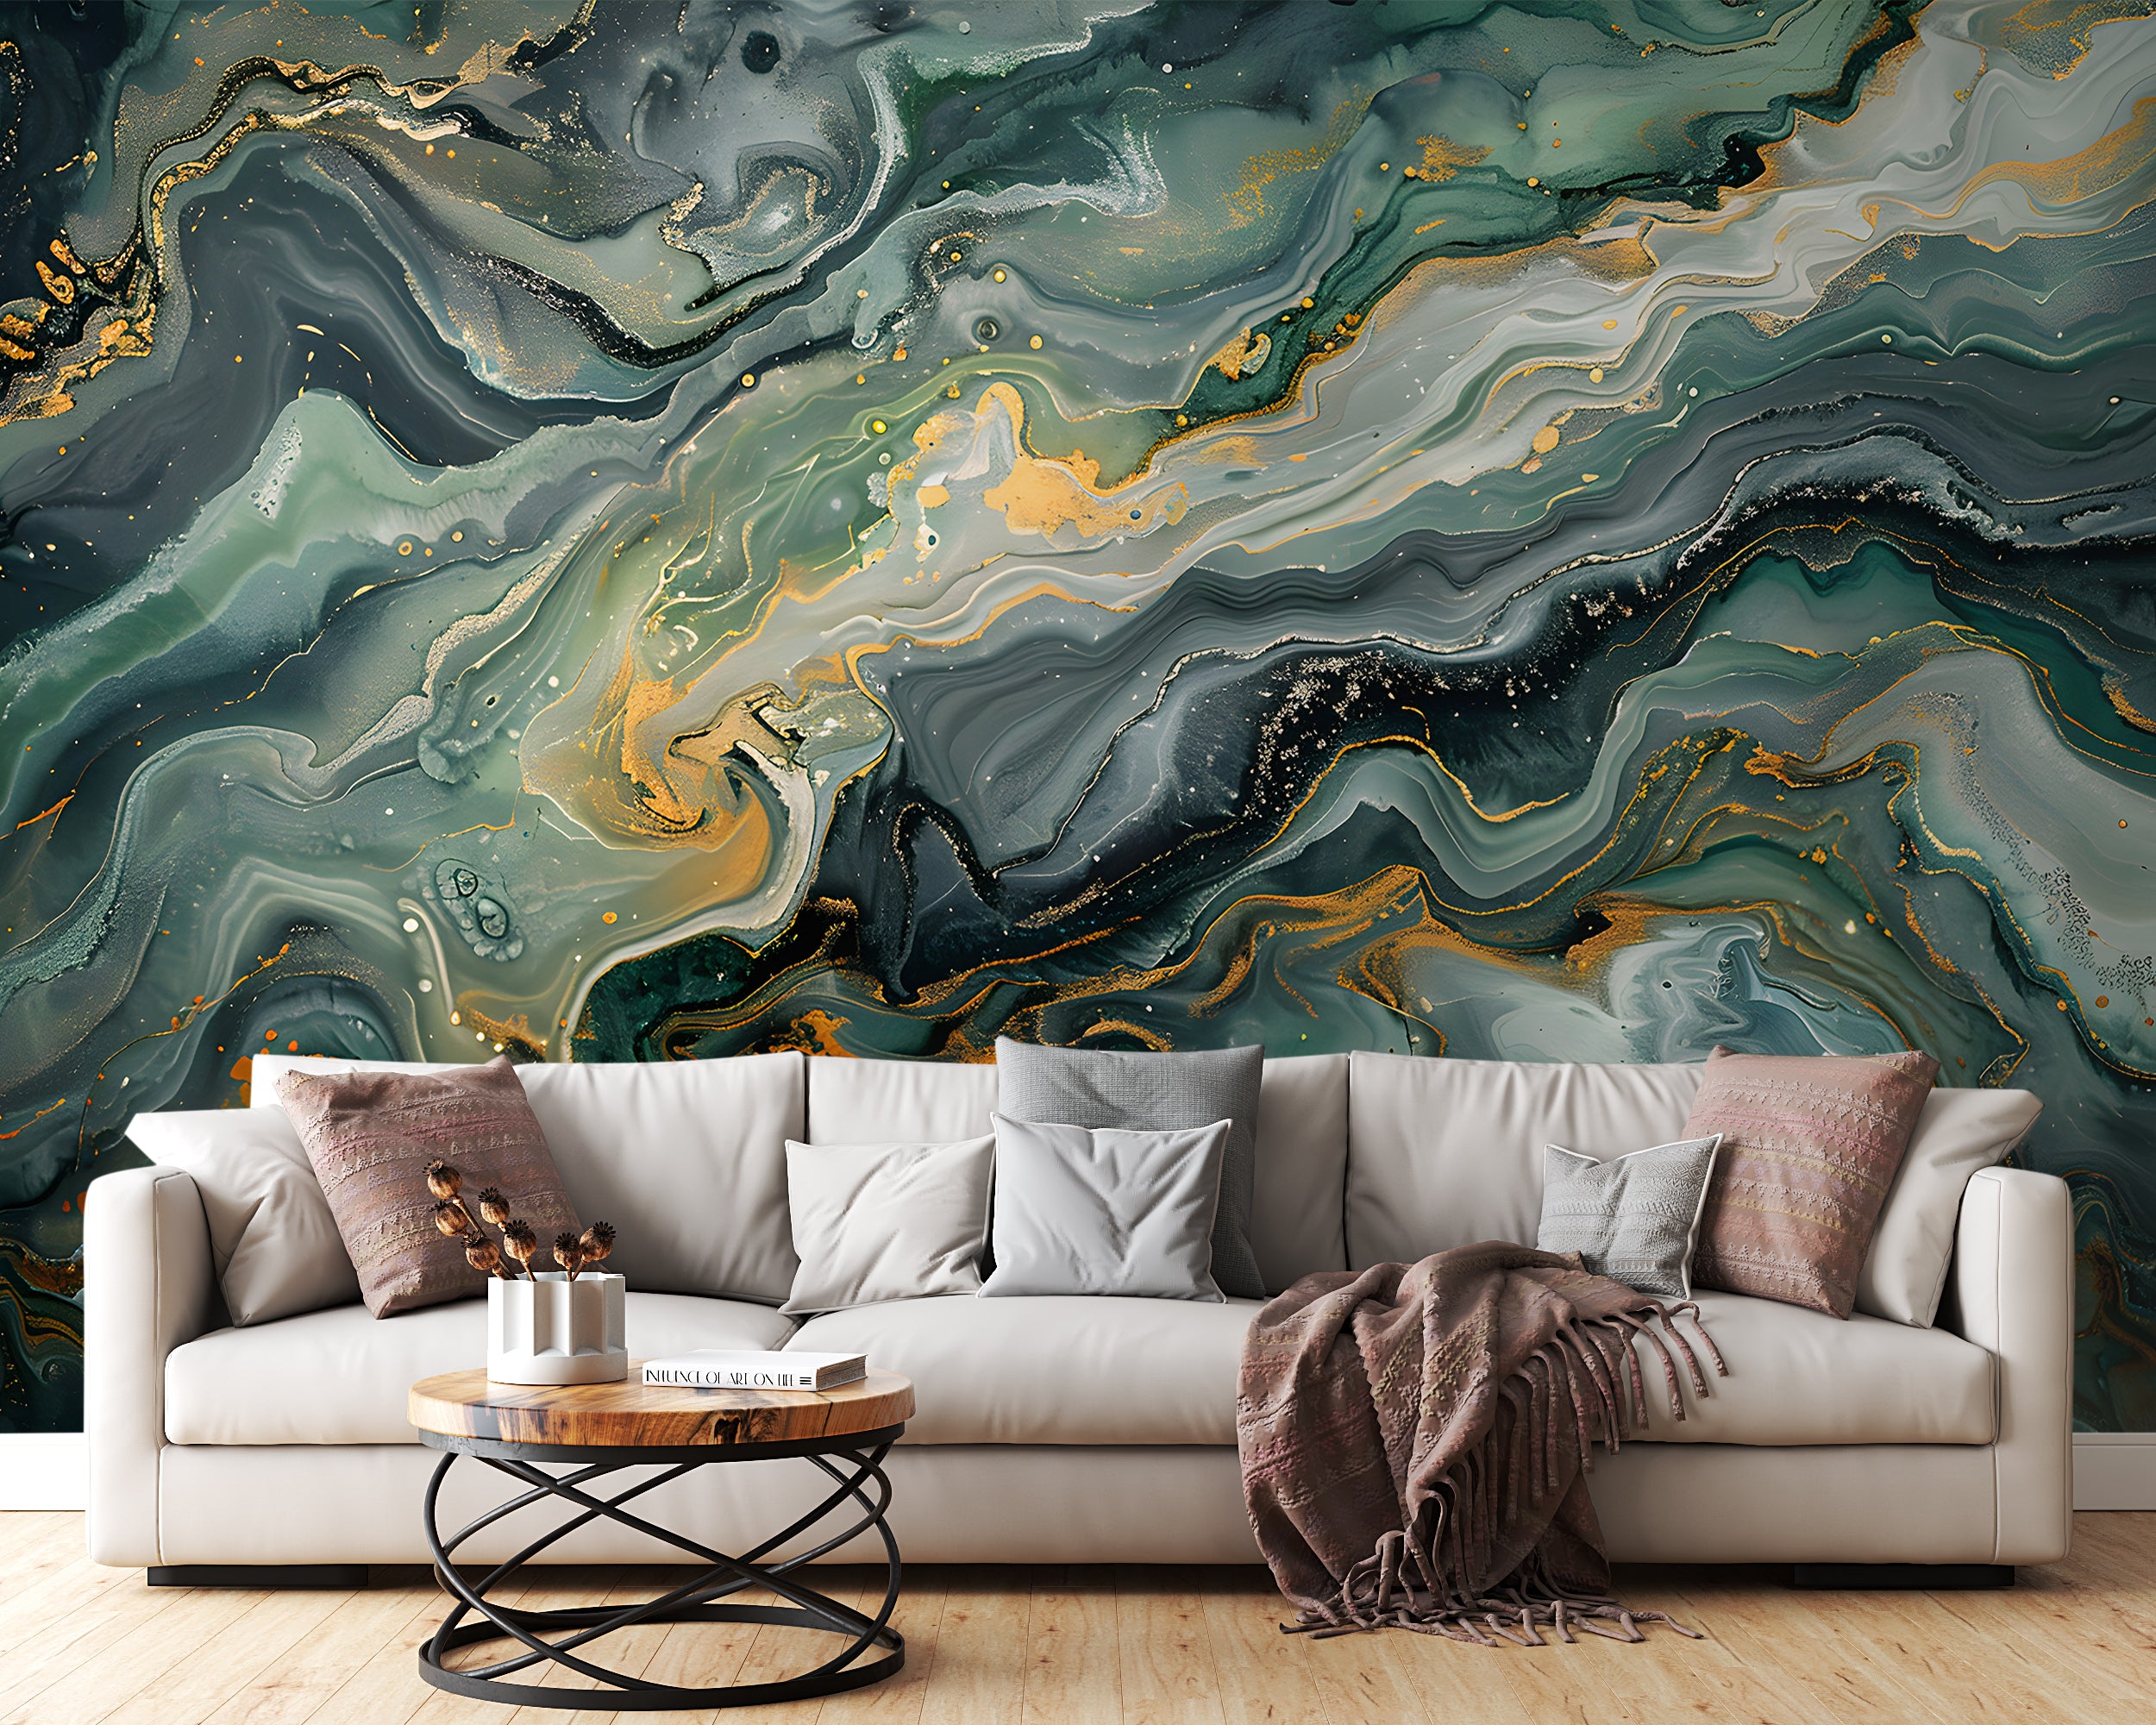 Deep Green Marble Mural, Alcohol Ink Abstract Wallpaper, Peel and Stick Dark Green Stone Texture Art, Removable Marble Sticker Decor